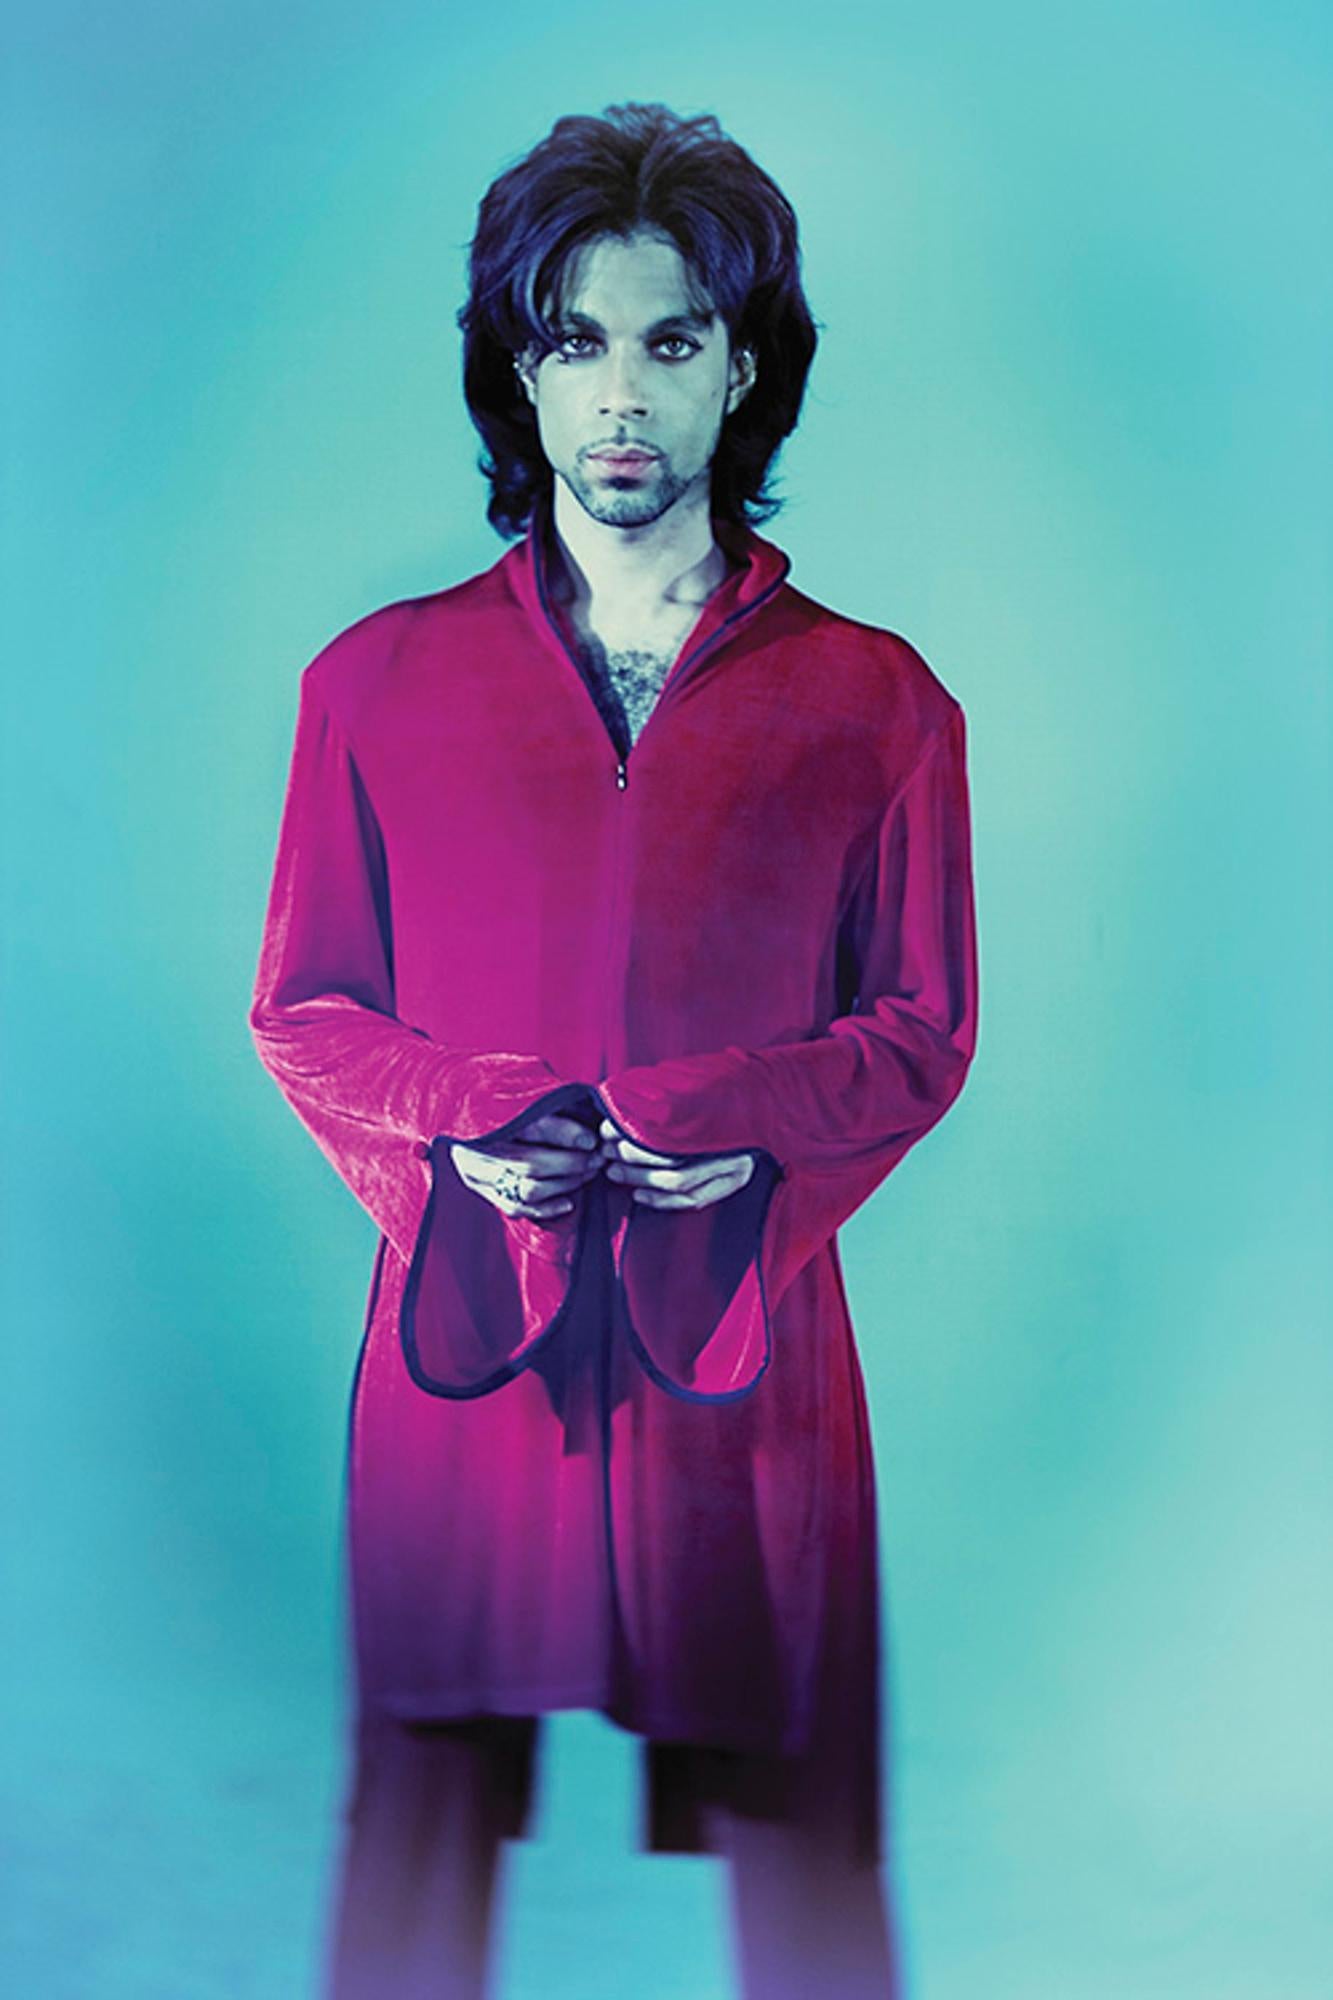 Portrait of American singer-songwriter, multi-instrumentalist and record producer, Prince.

Available sizes: 
16”x12” Edition of 25
20”x16" Edition of 25
24”x20" Edition of 25
40”x30" Edition of 25
60”x40” Edition of 25
72”x48” Edition of 25

This